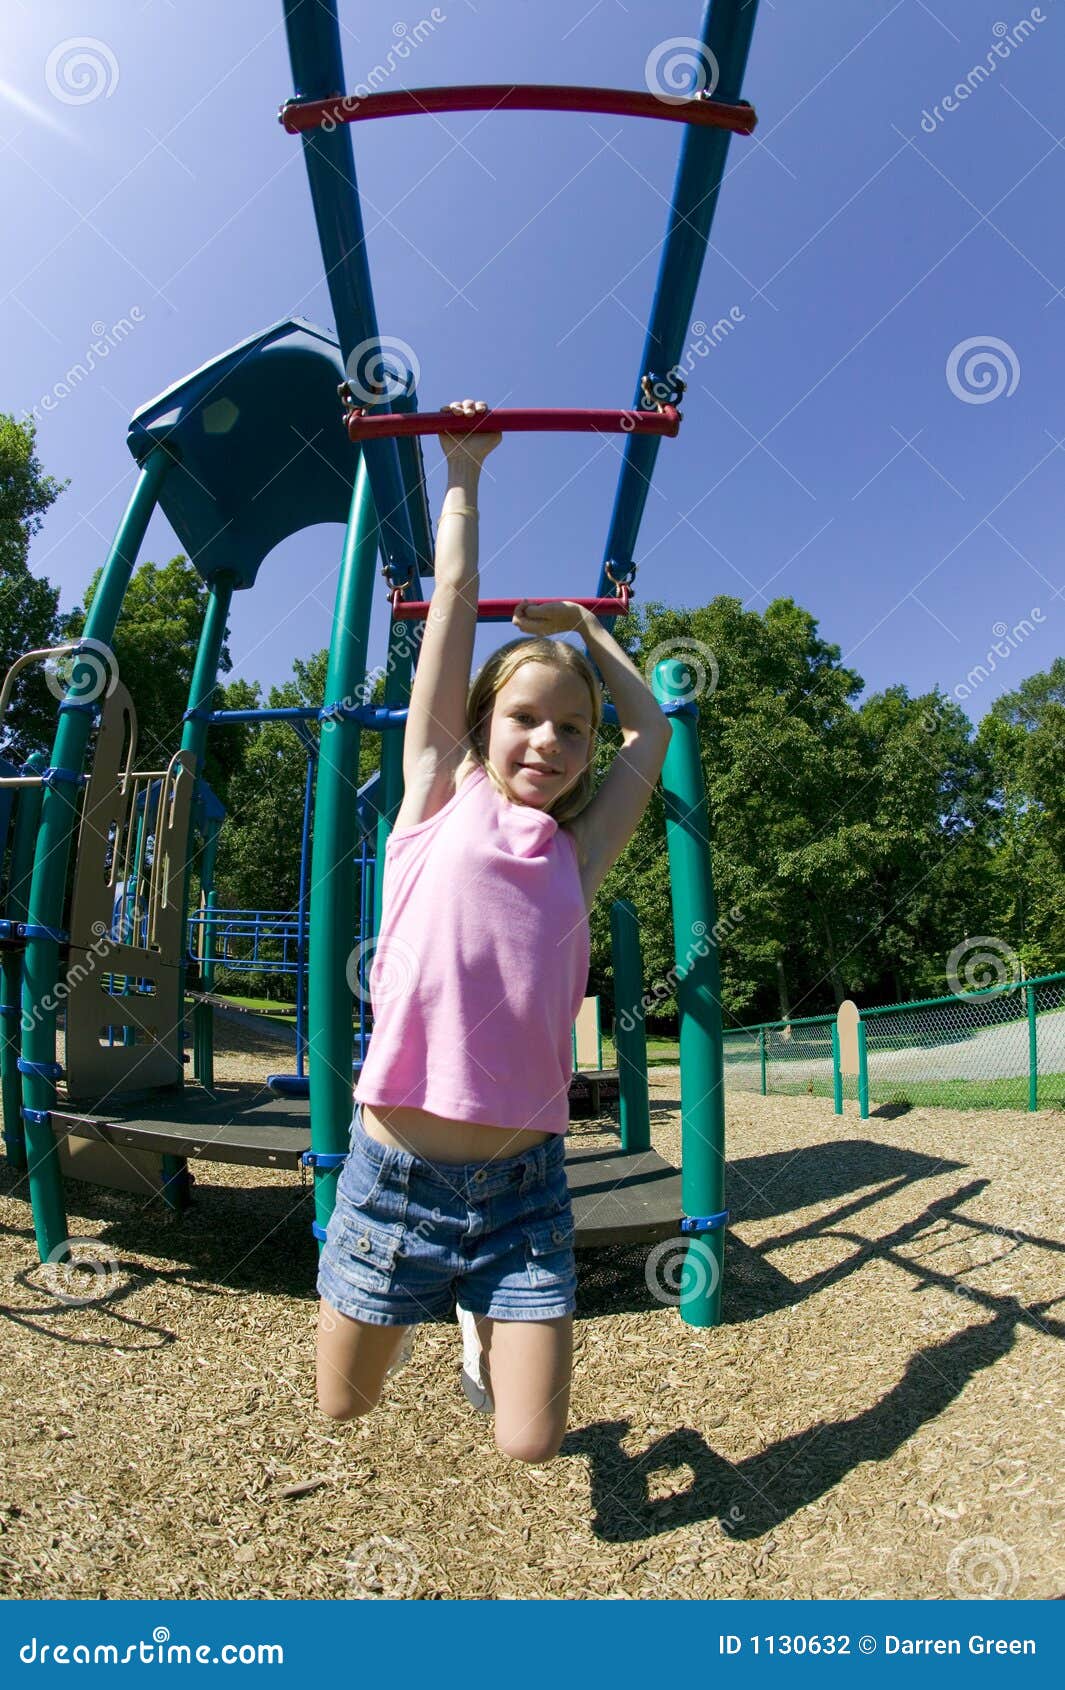 Young Girl Playing On Monkey Bars At The Park Stock Image 